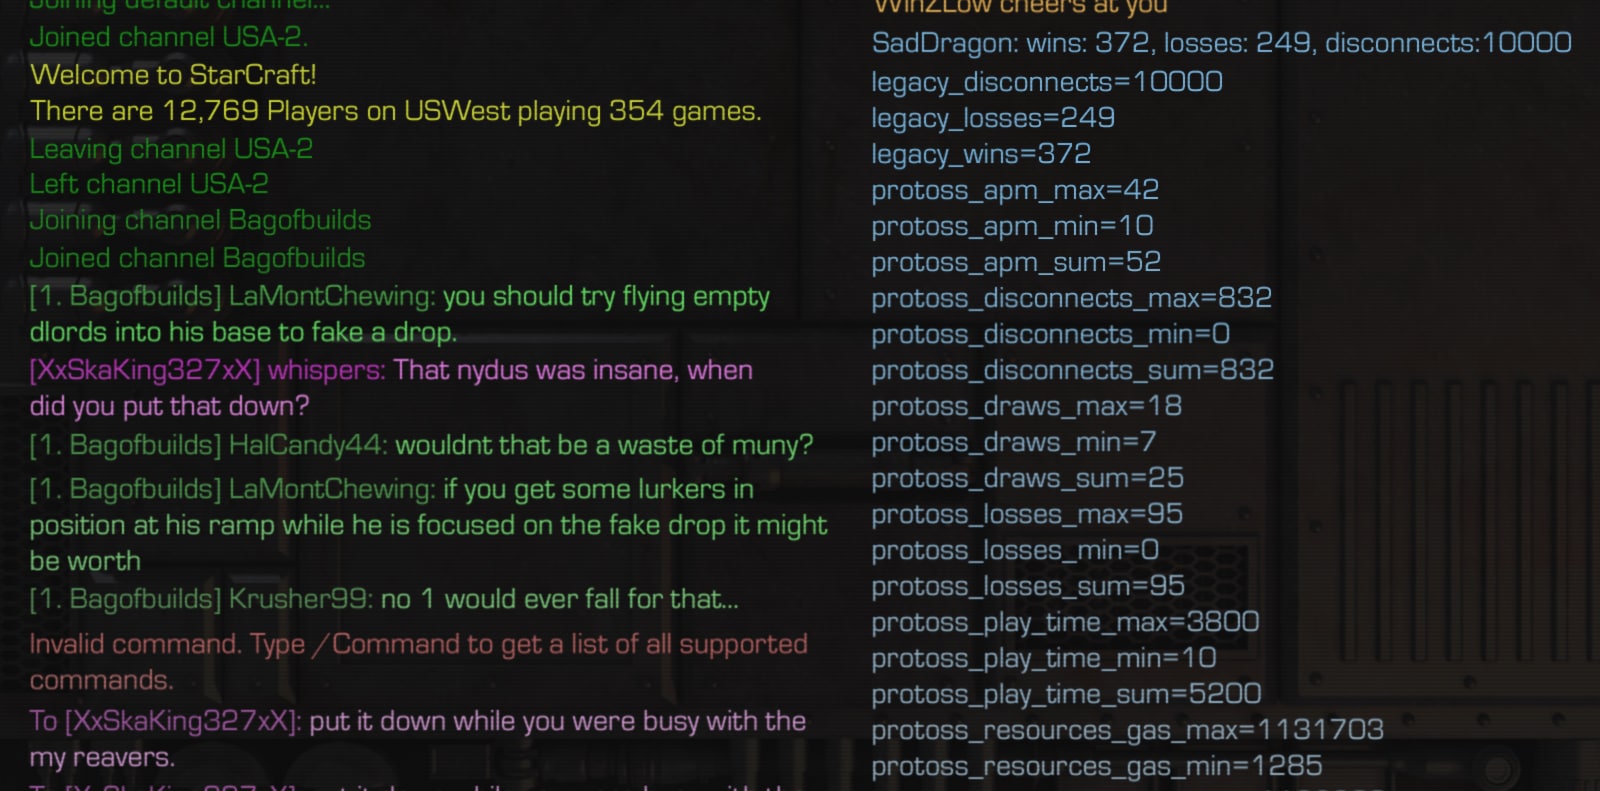 D2 ingame chat history